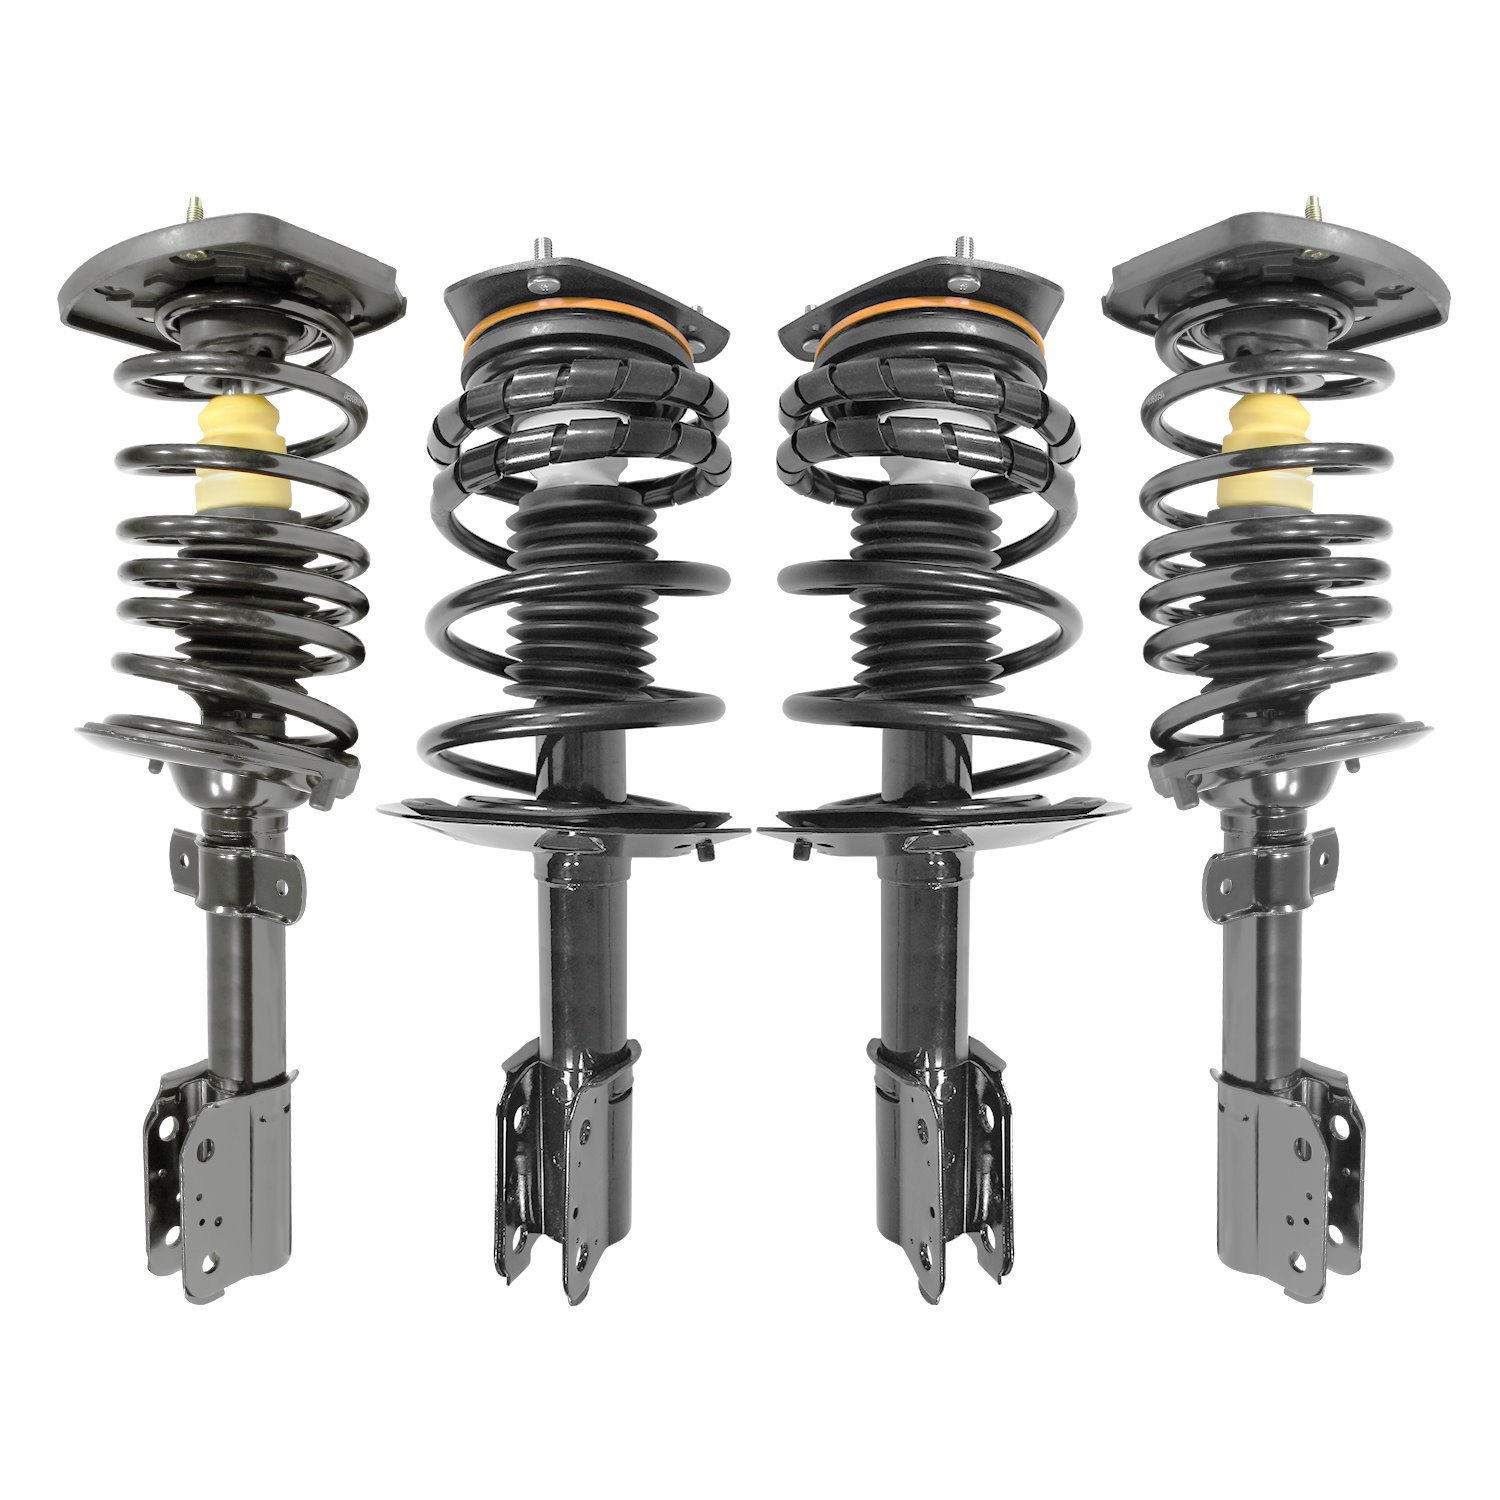 4-11020-15311-001 Front & Rear Suspension Strut & Coil Spring Assembly Kit Fits Select GM